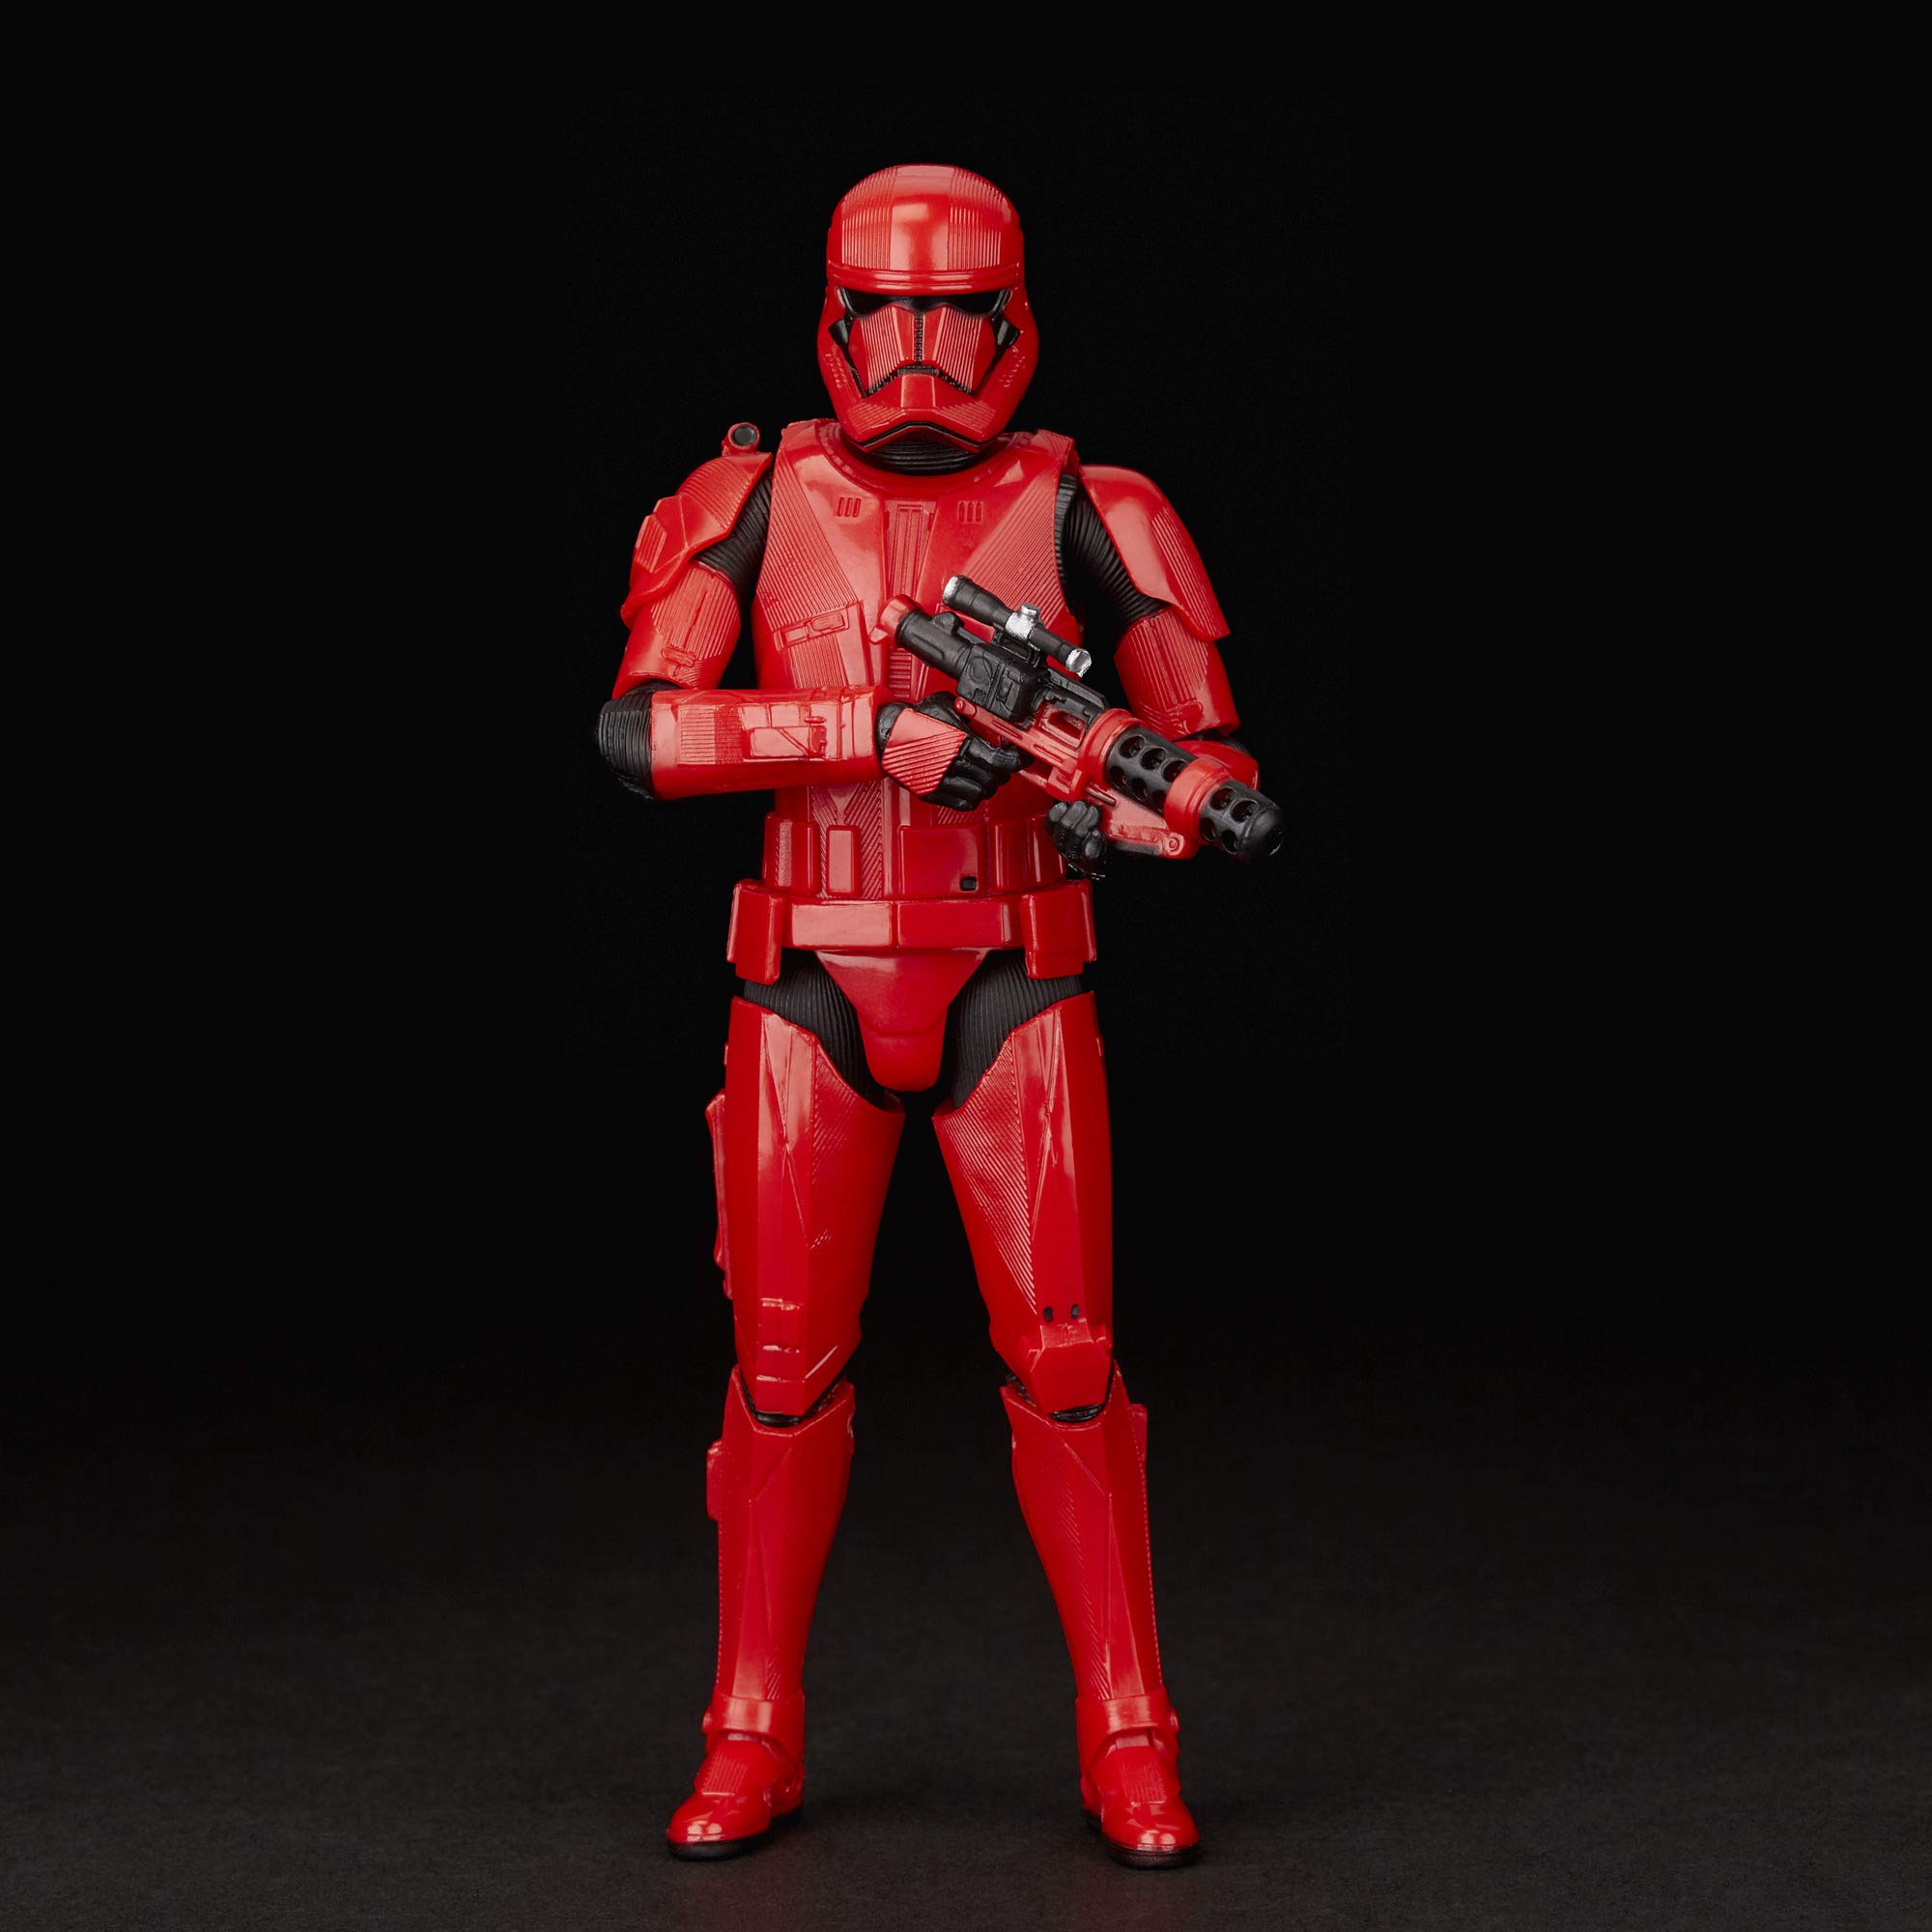 STAR WARS The Black Series Sith Trooper Toy 6